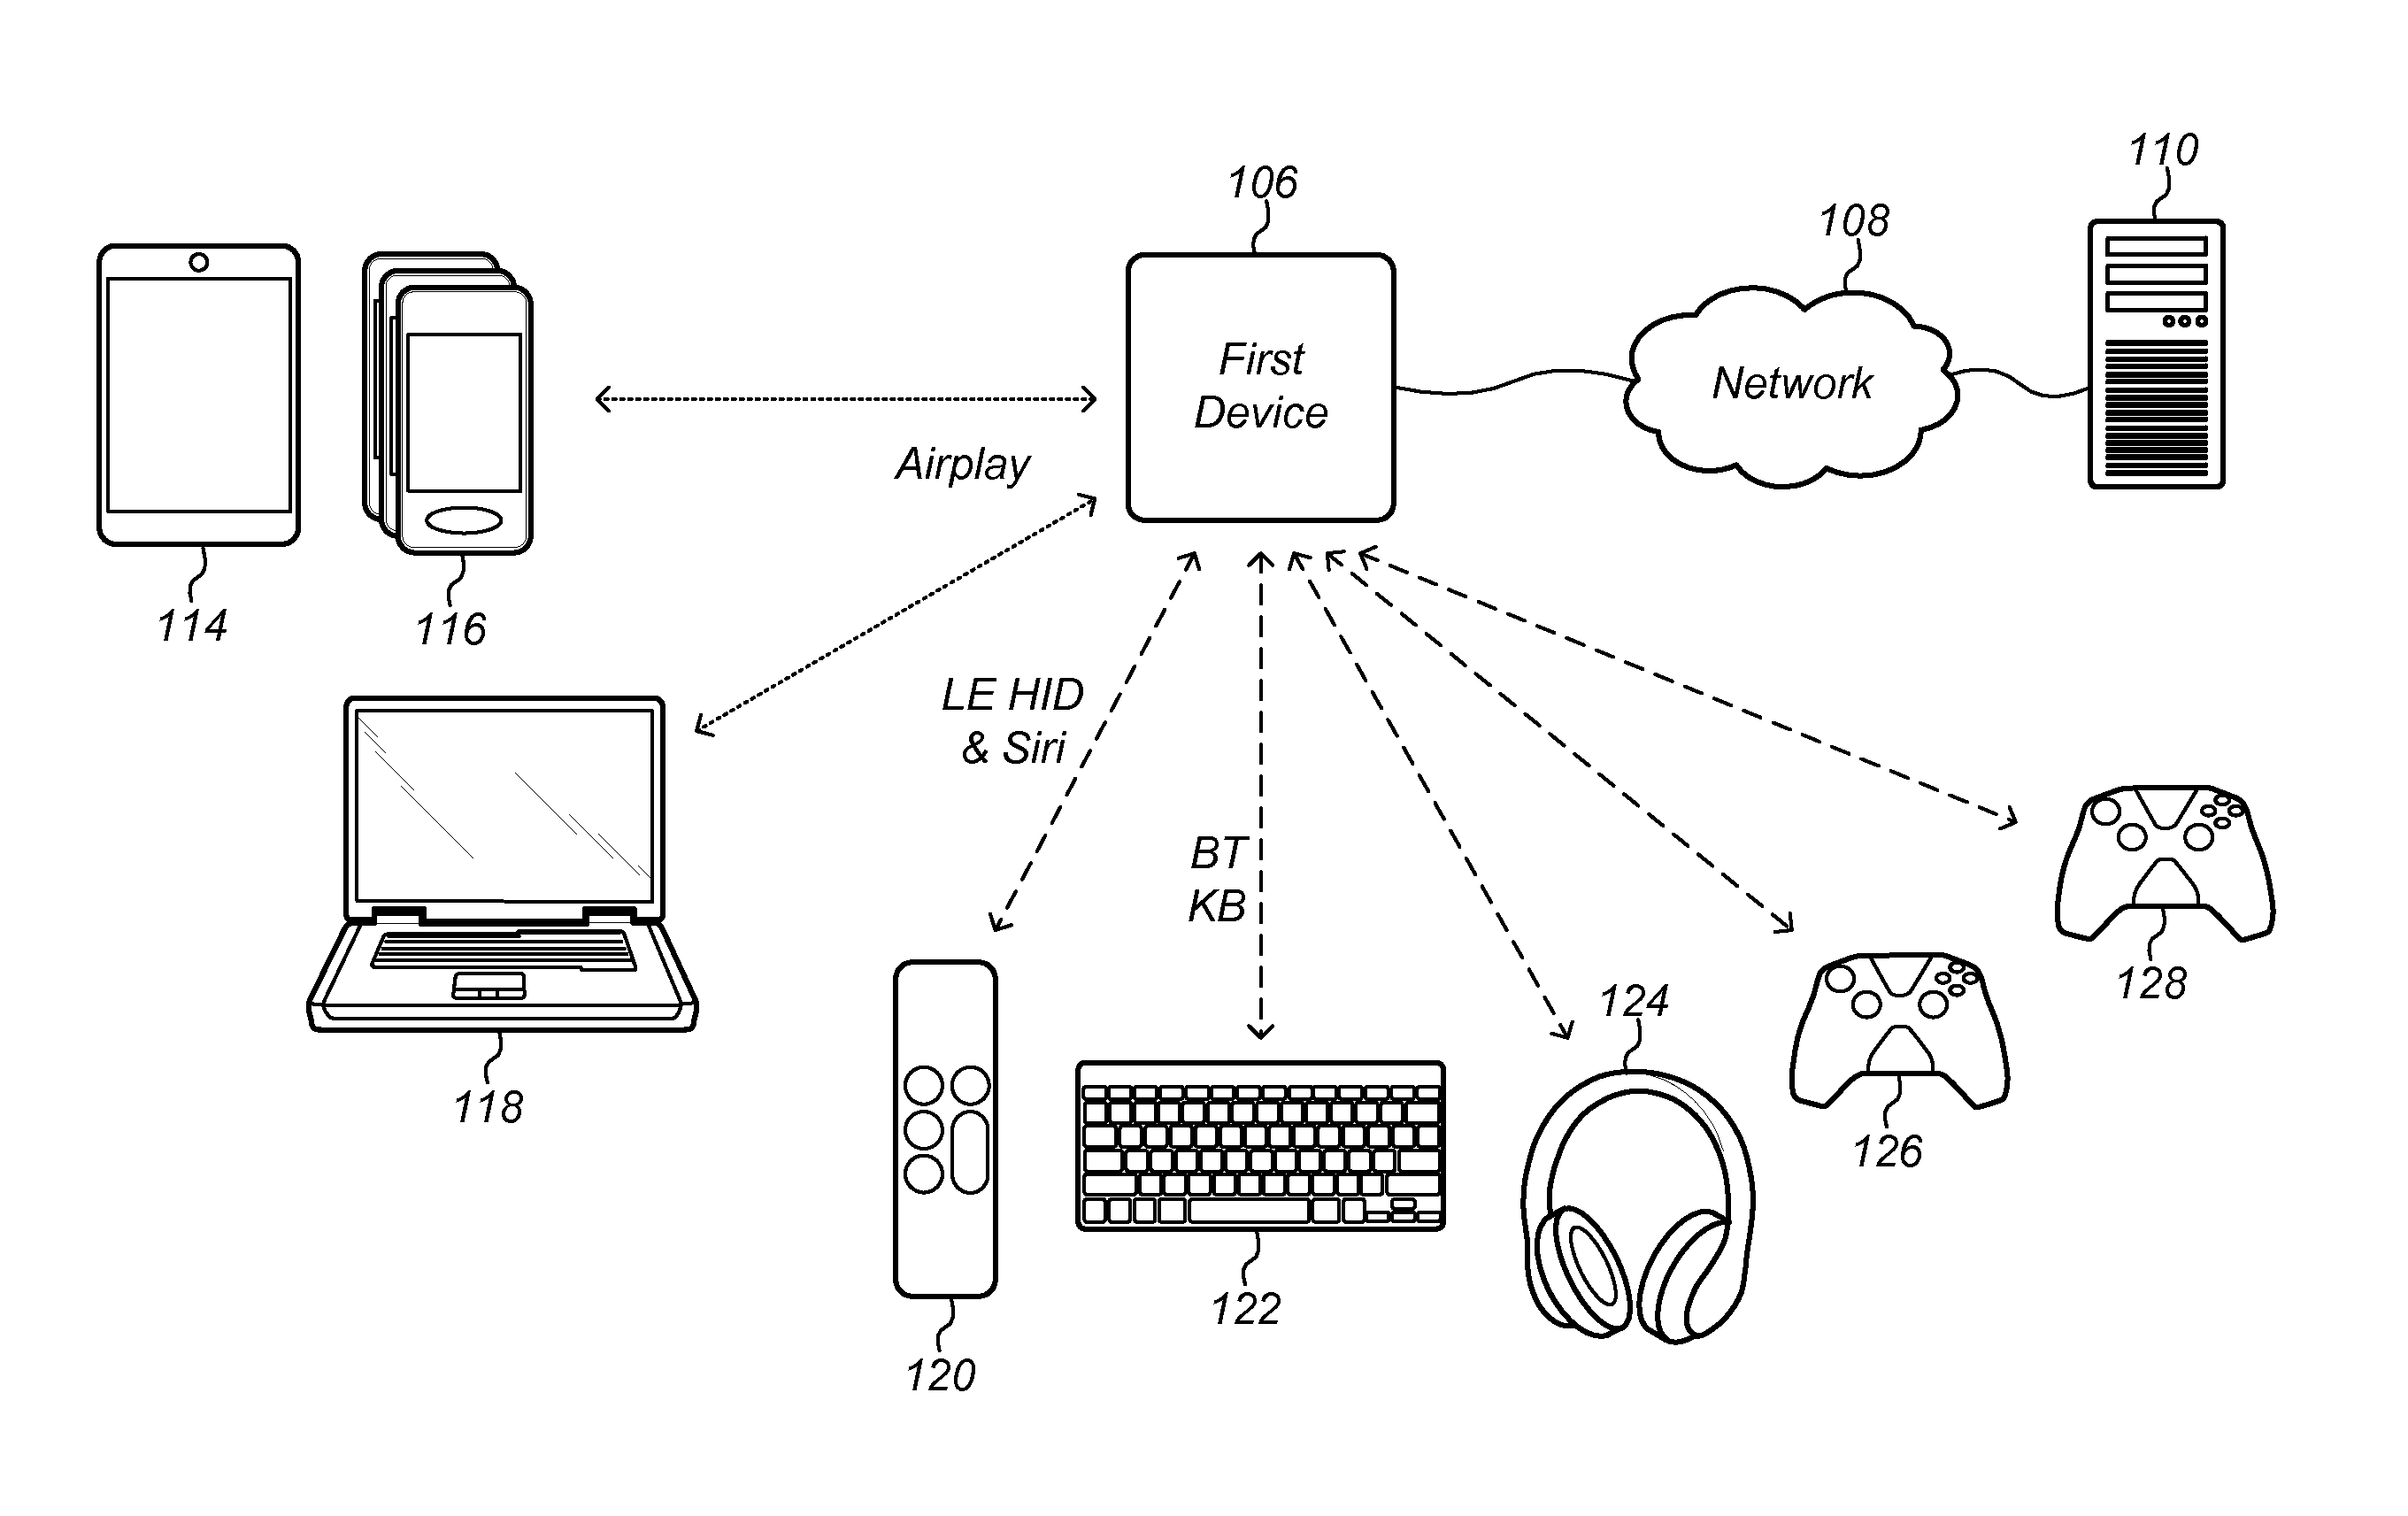 Cloud-Based Proximity Pairing and Switching for Peer-to-Peer Devices